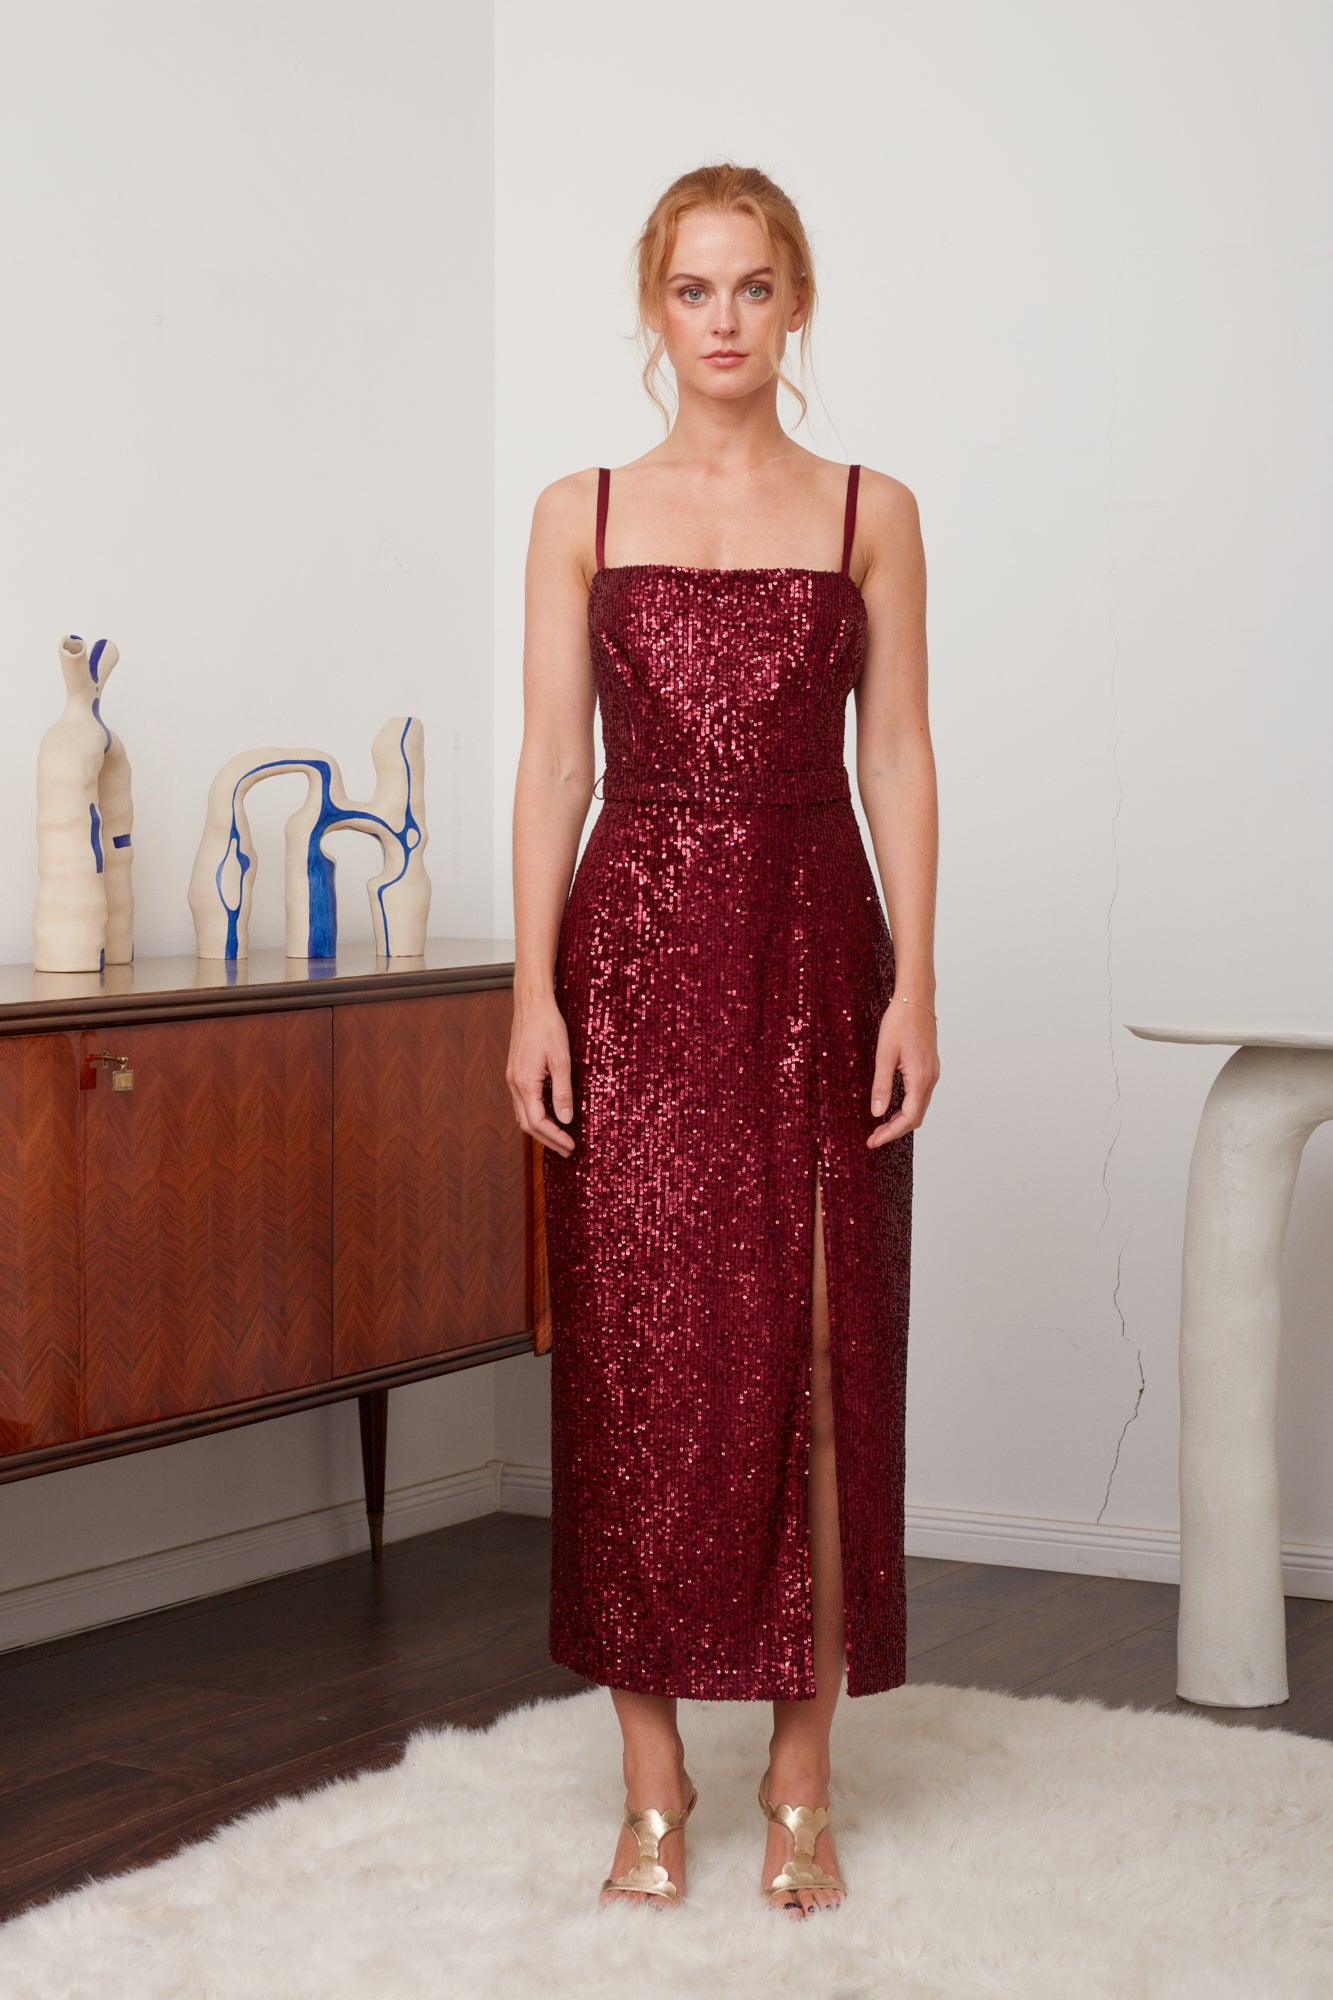 CHLOE Deep Red Sequin Open Back Cocktail Dress - Glamorous and Stunning